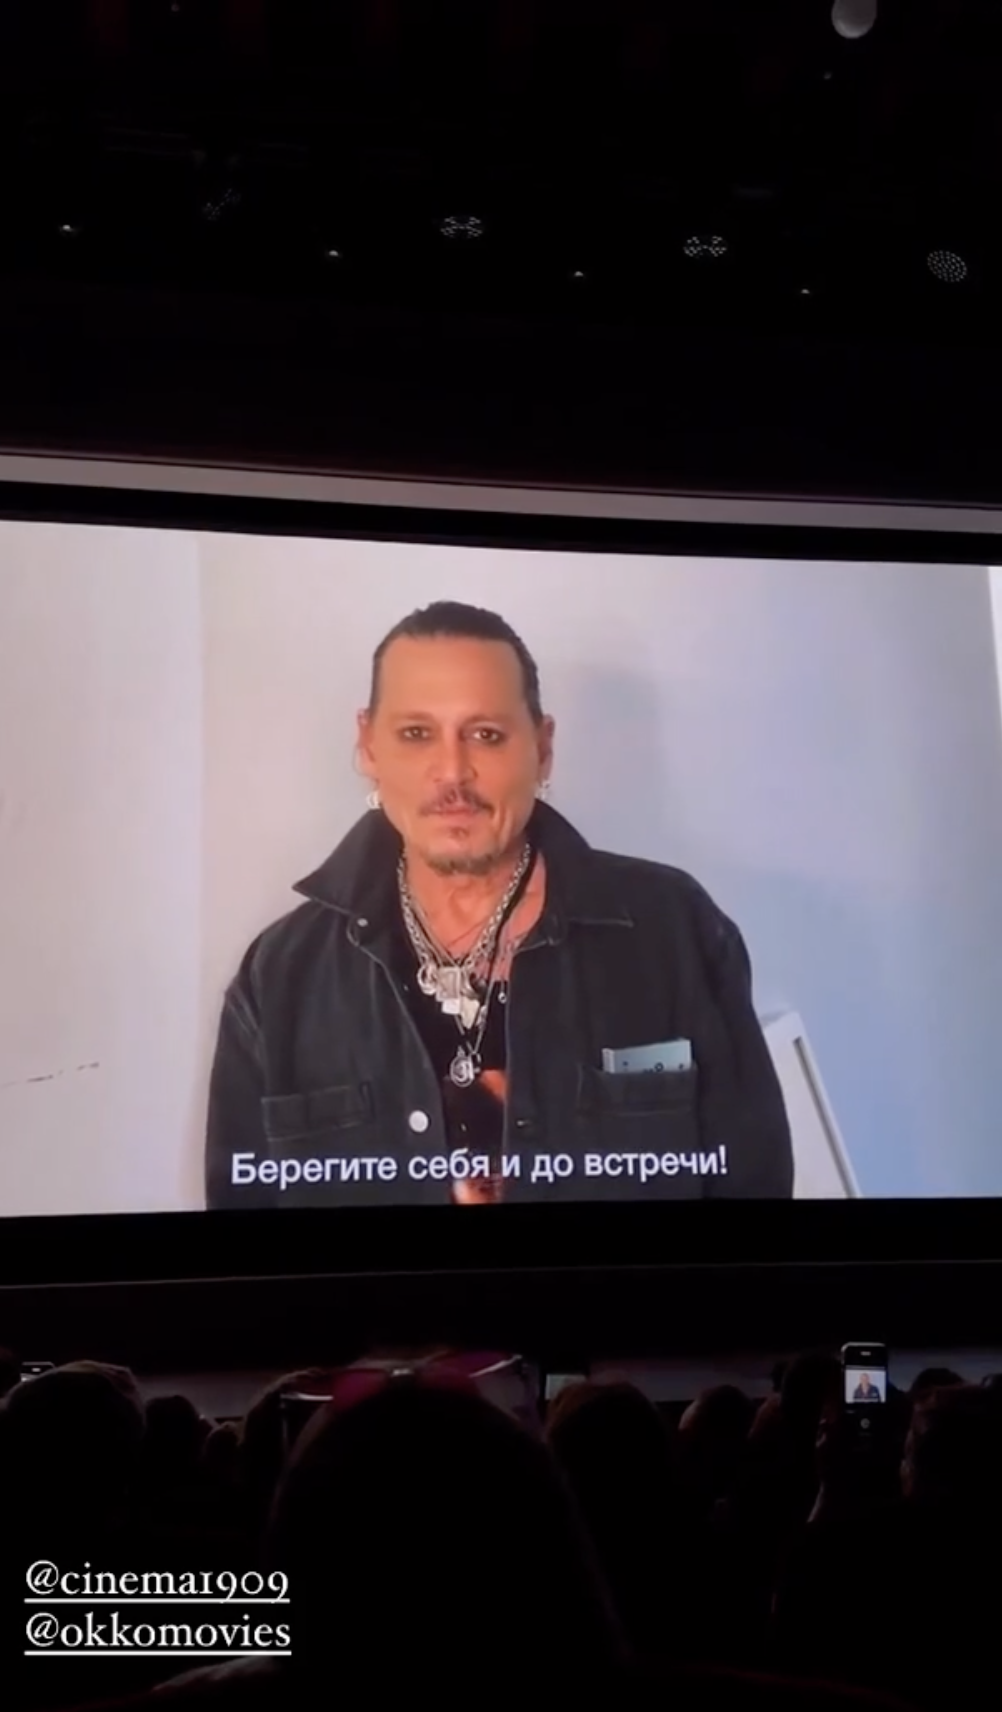 Johnny Depp's representatives comment for the first time on the fake about his ''visit'' to Russia and his scandalous appeal to Russians